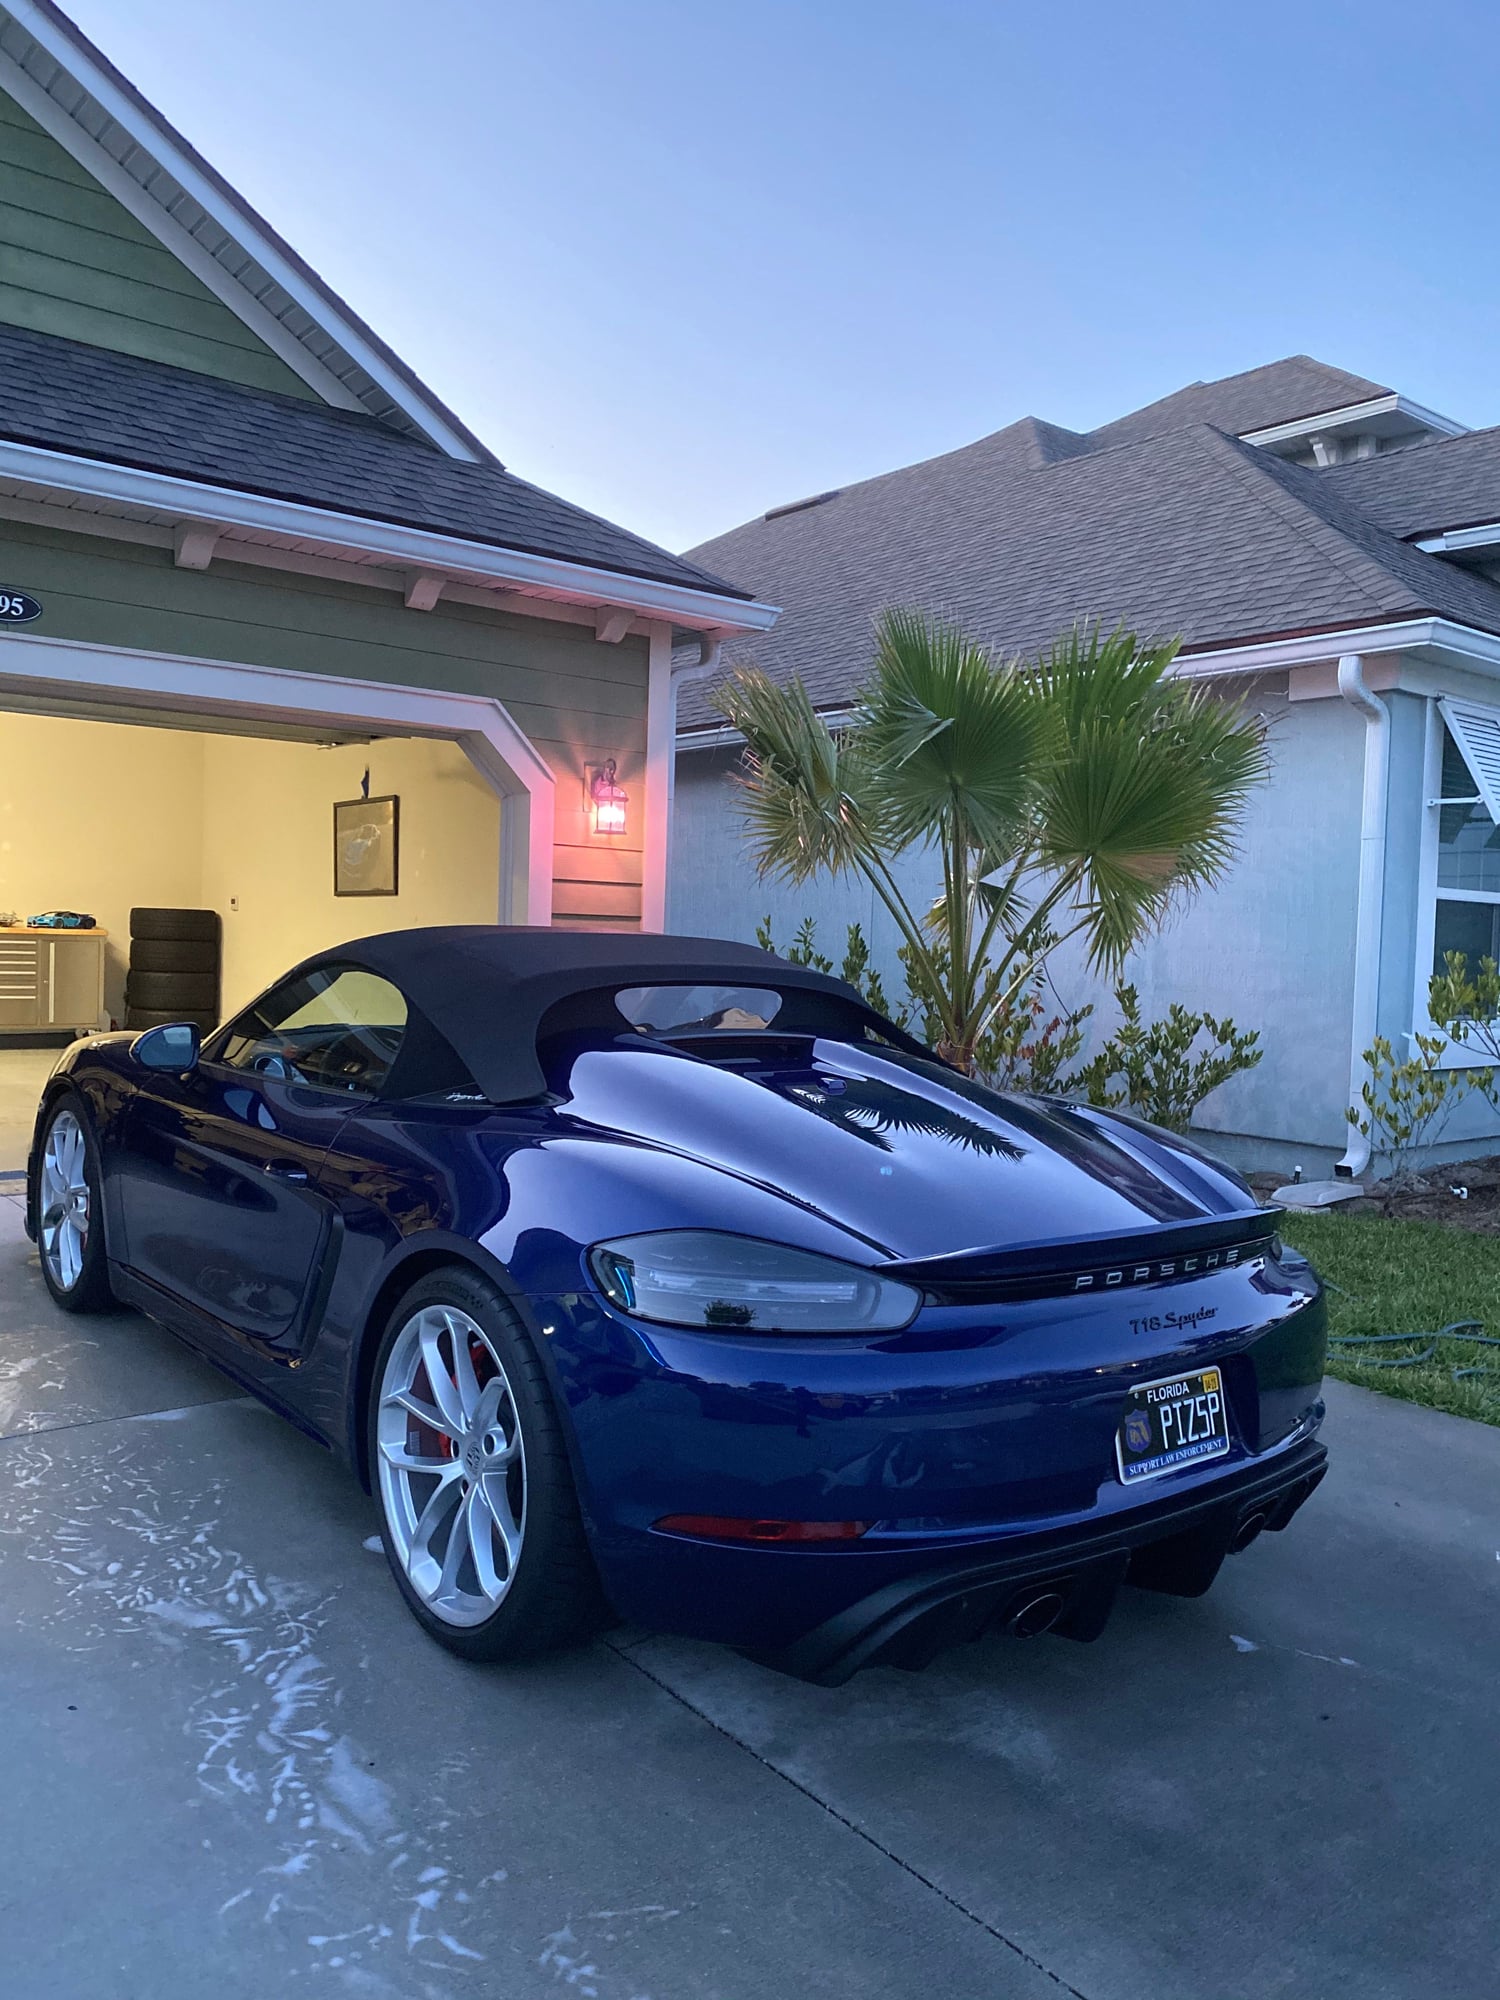 2020 Porsche 718 Spyder - 2020 718 Spyder - Used - VIN WP0CC2A82LS240650 - 7,000 Miles - 6 cyl - 2WD - Manual - Convertible - Blue - Ponte Vedra, FL 32081, United States